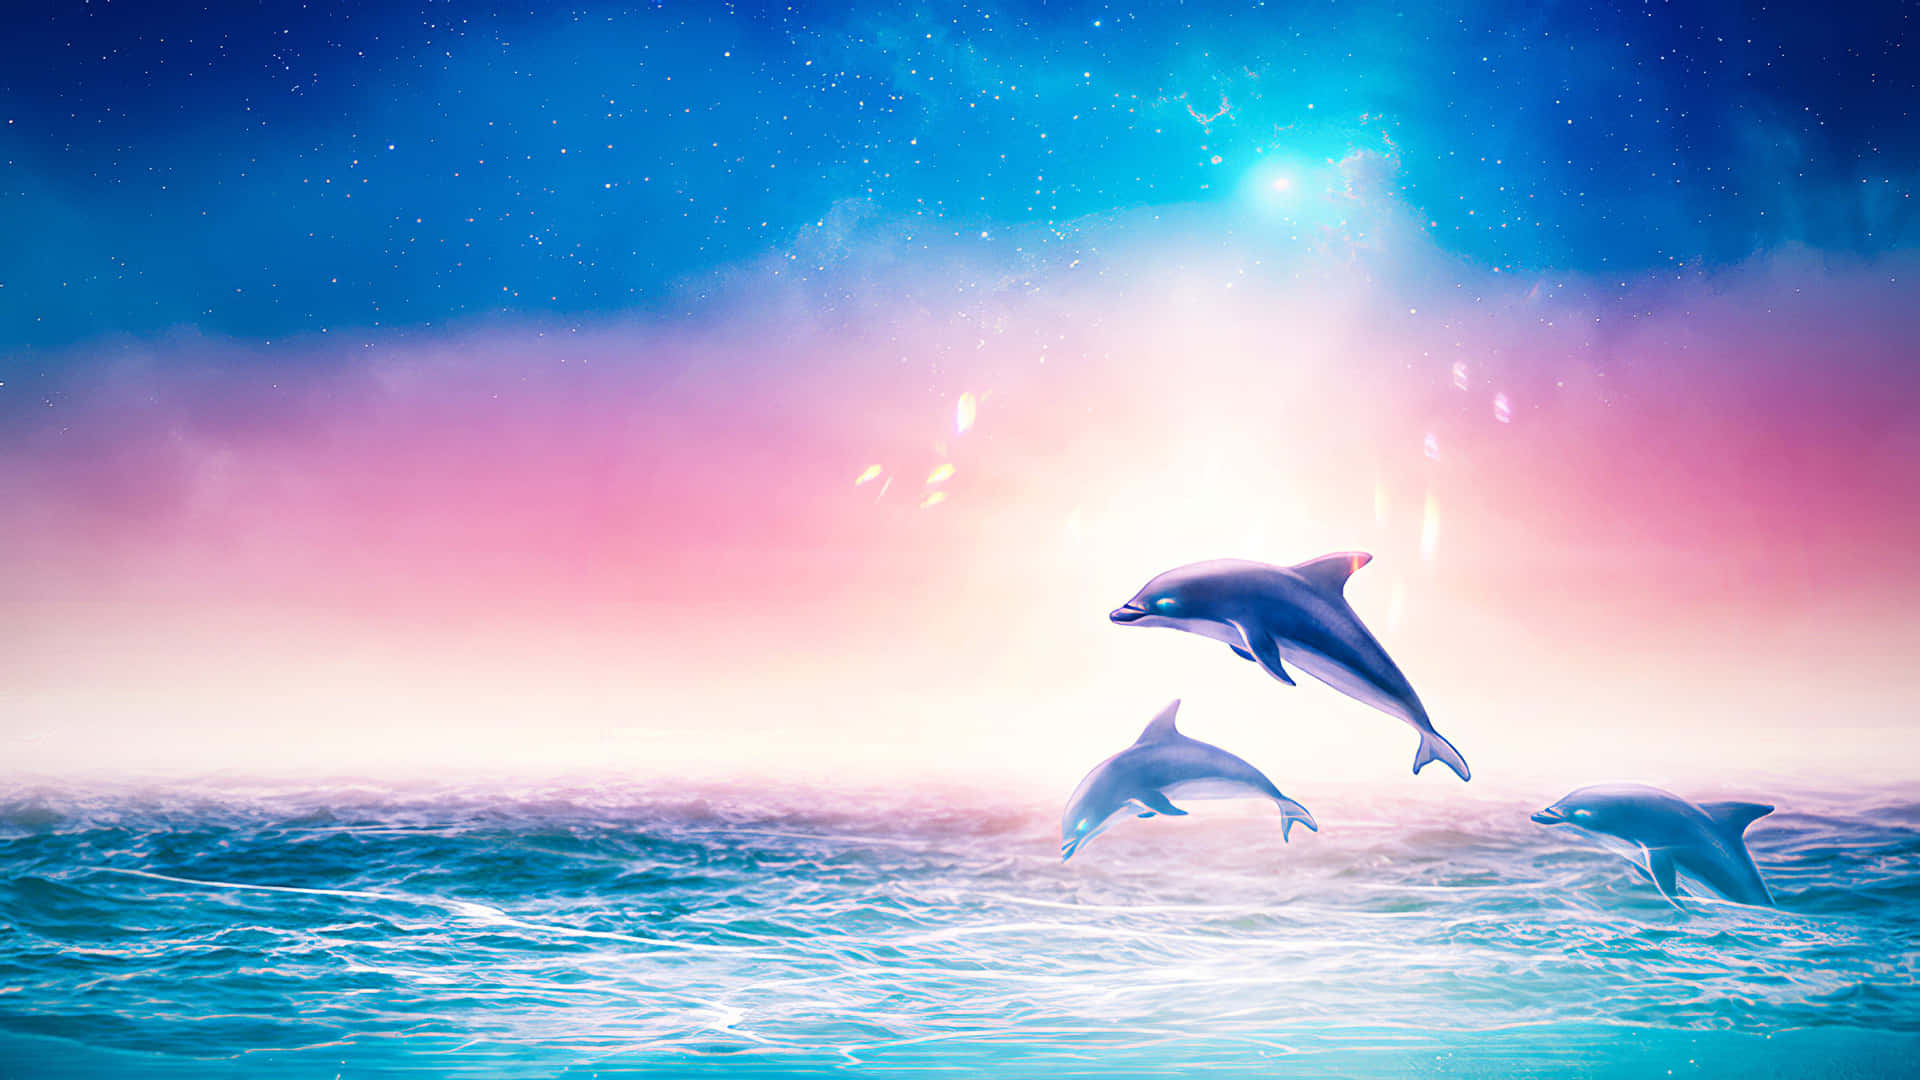 A Colorful Pink Dolphin Making A Splash In The Ocean Background